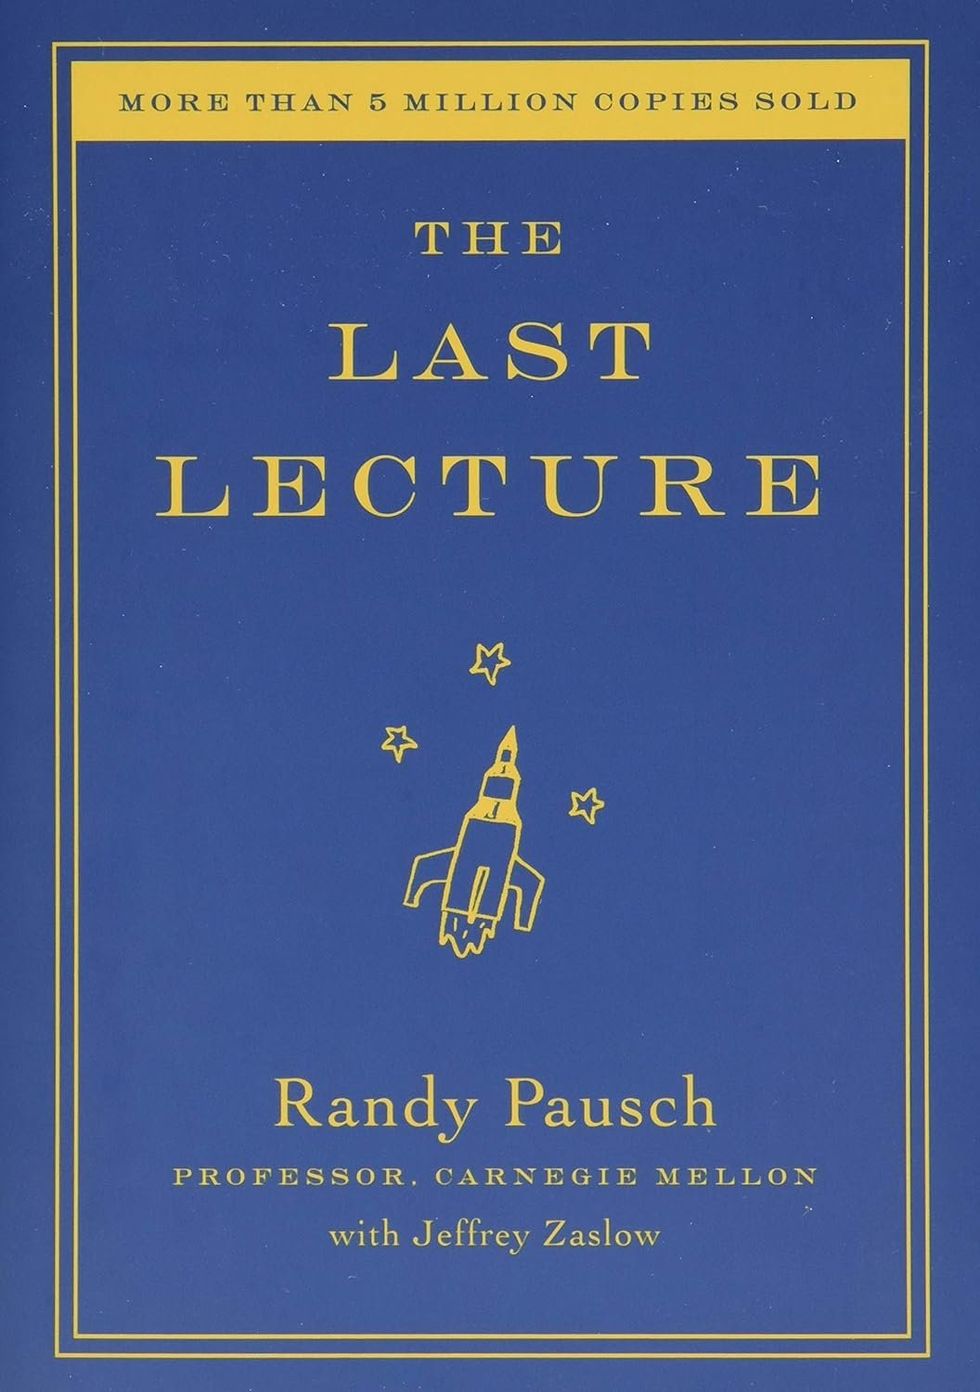 The Last Lecture book cover